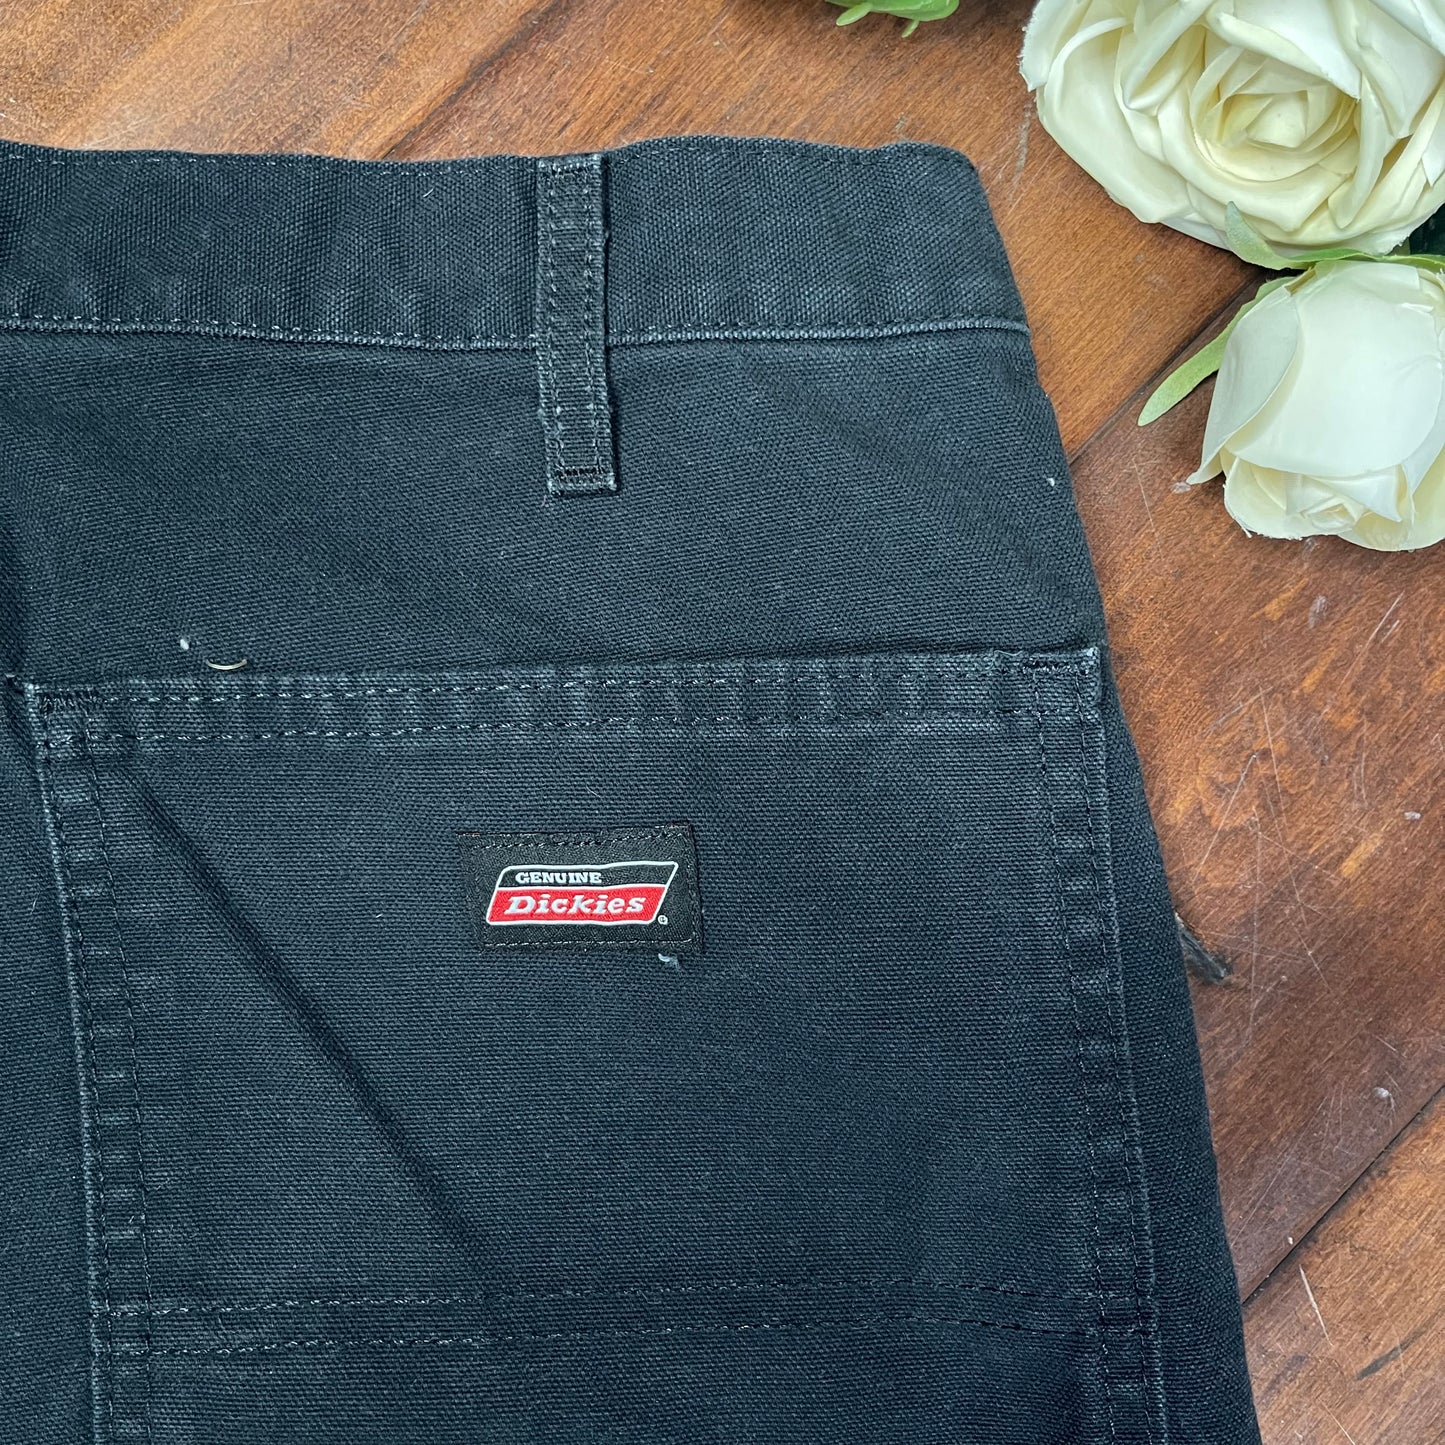 THRIFTED DICKIES BLACK JEANS